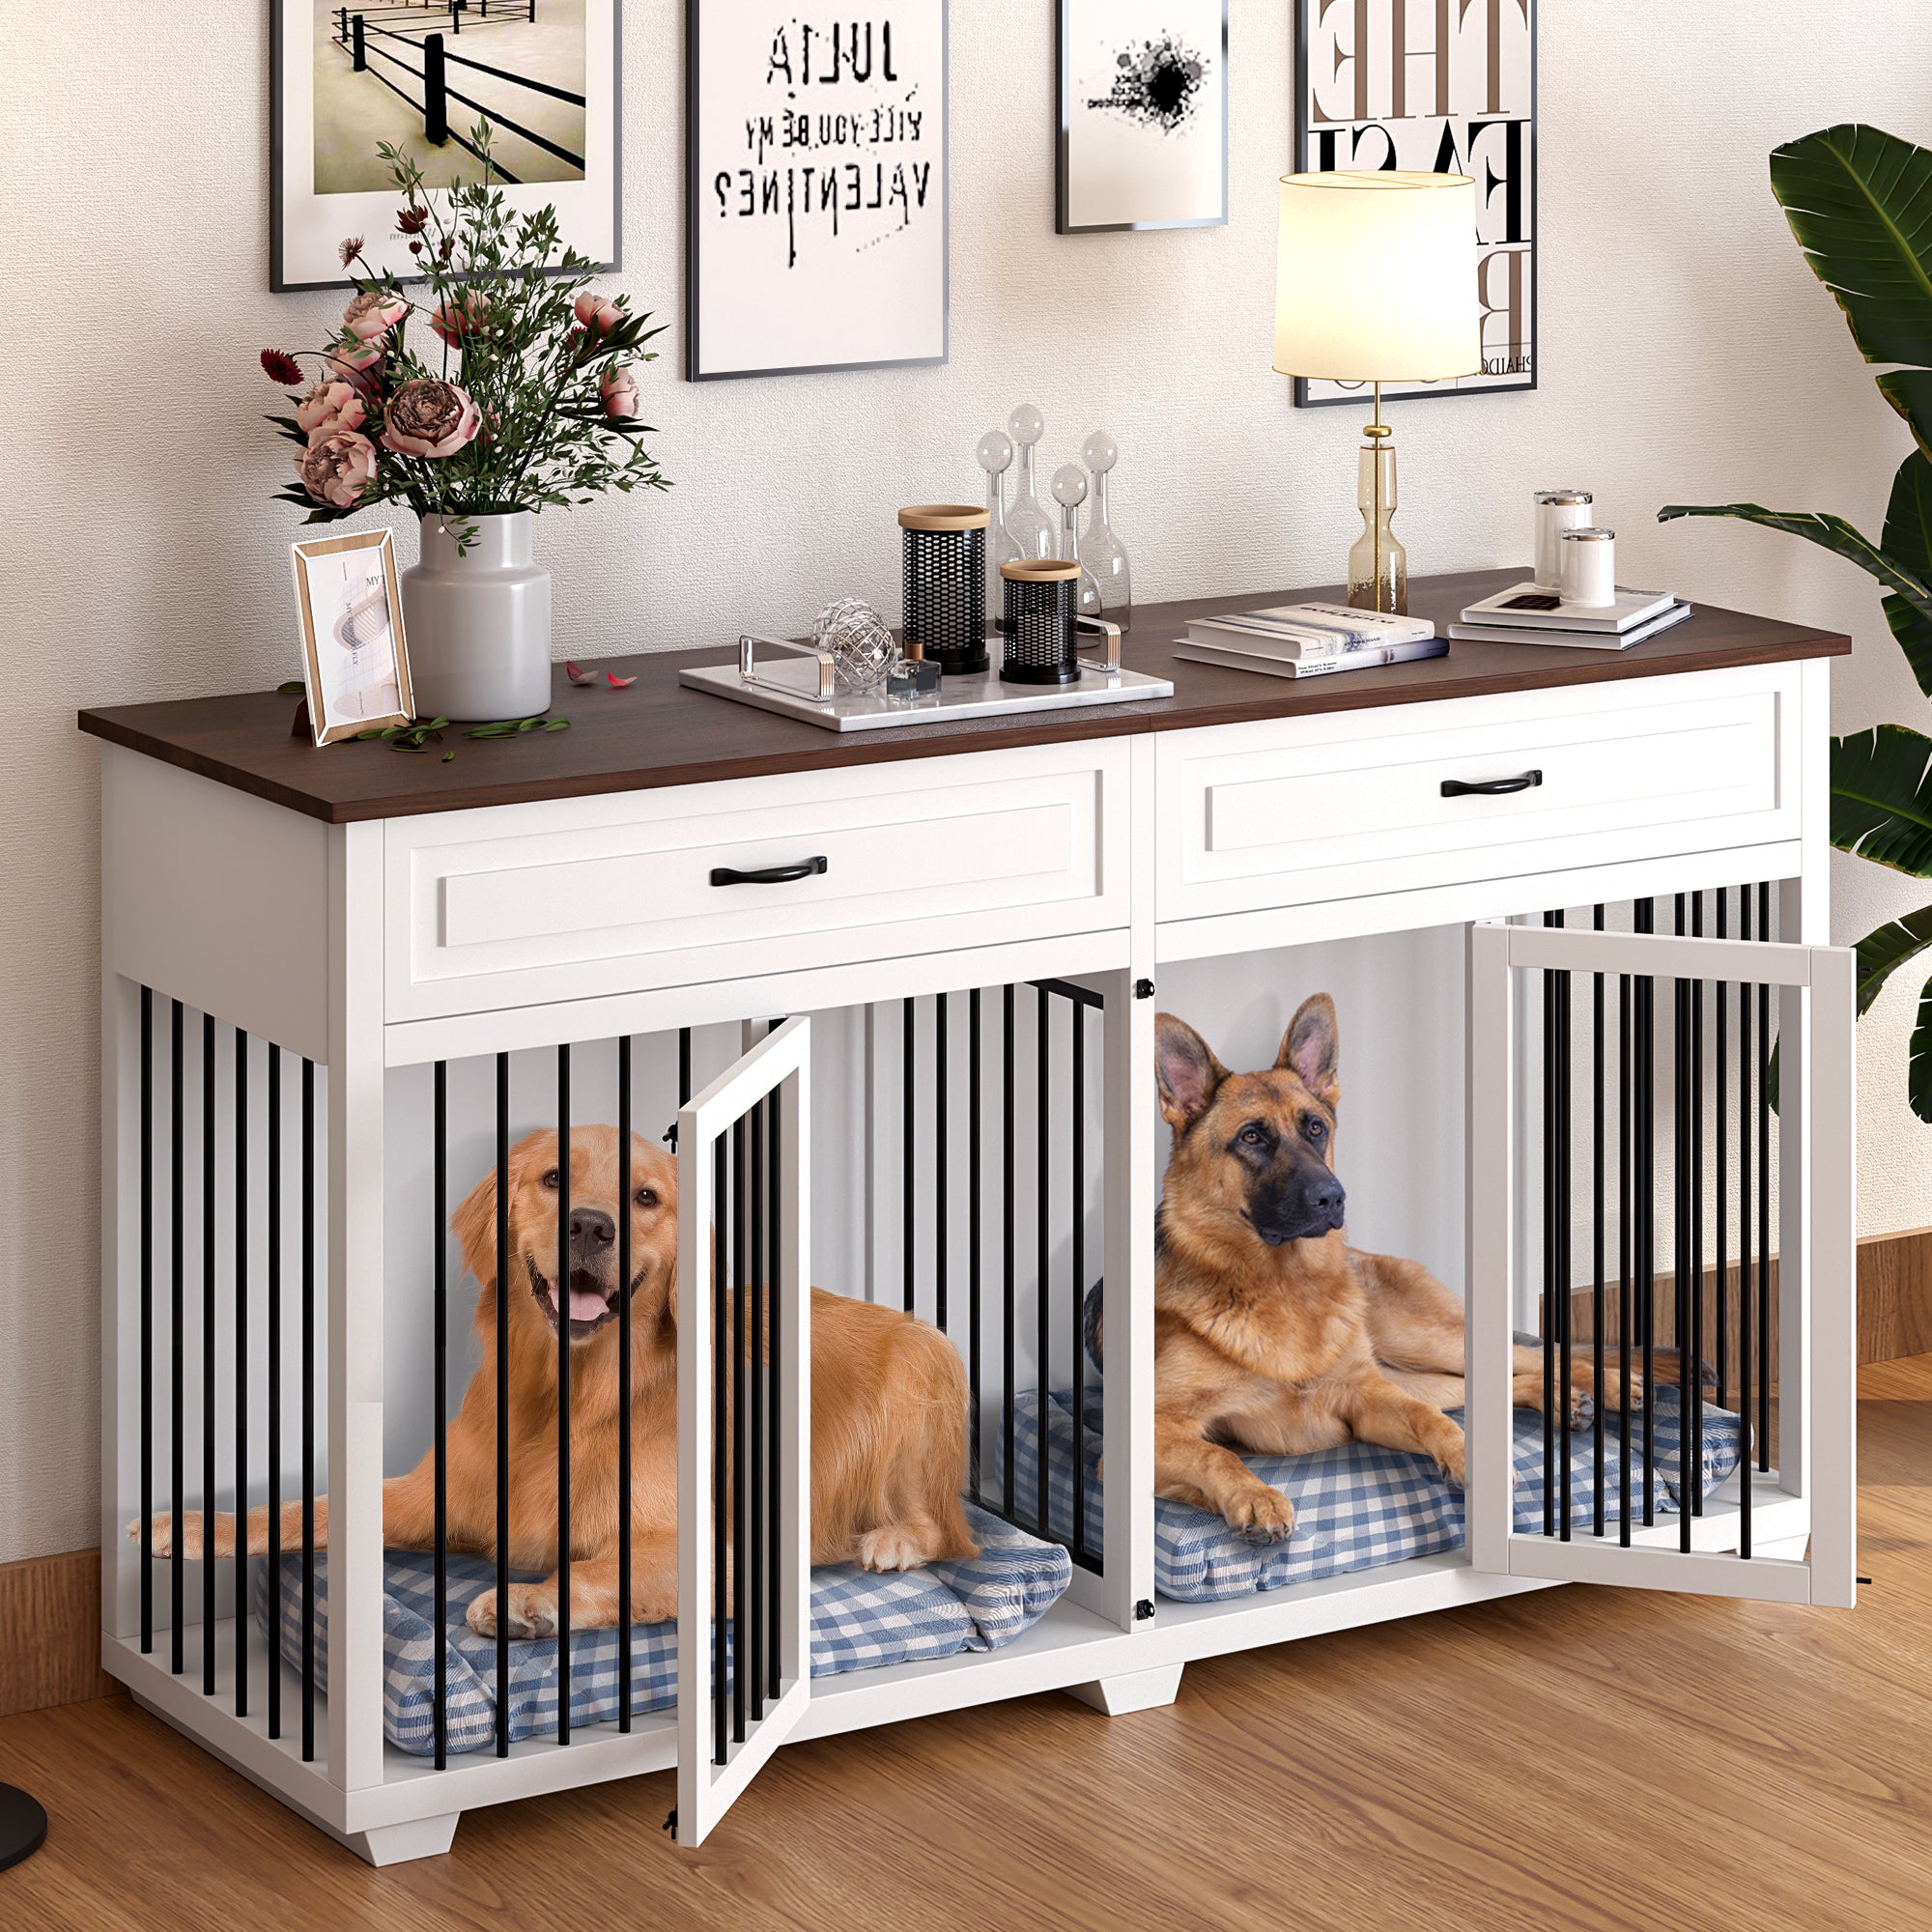 Large Dog Crate Furniture Wooden Dog Crate Kennel with 2 Drawers and Divider